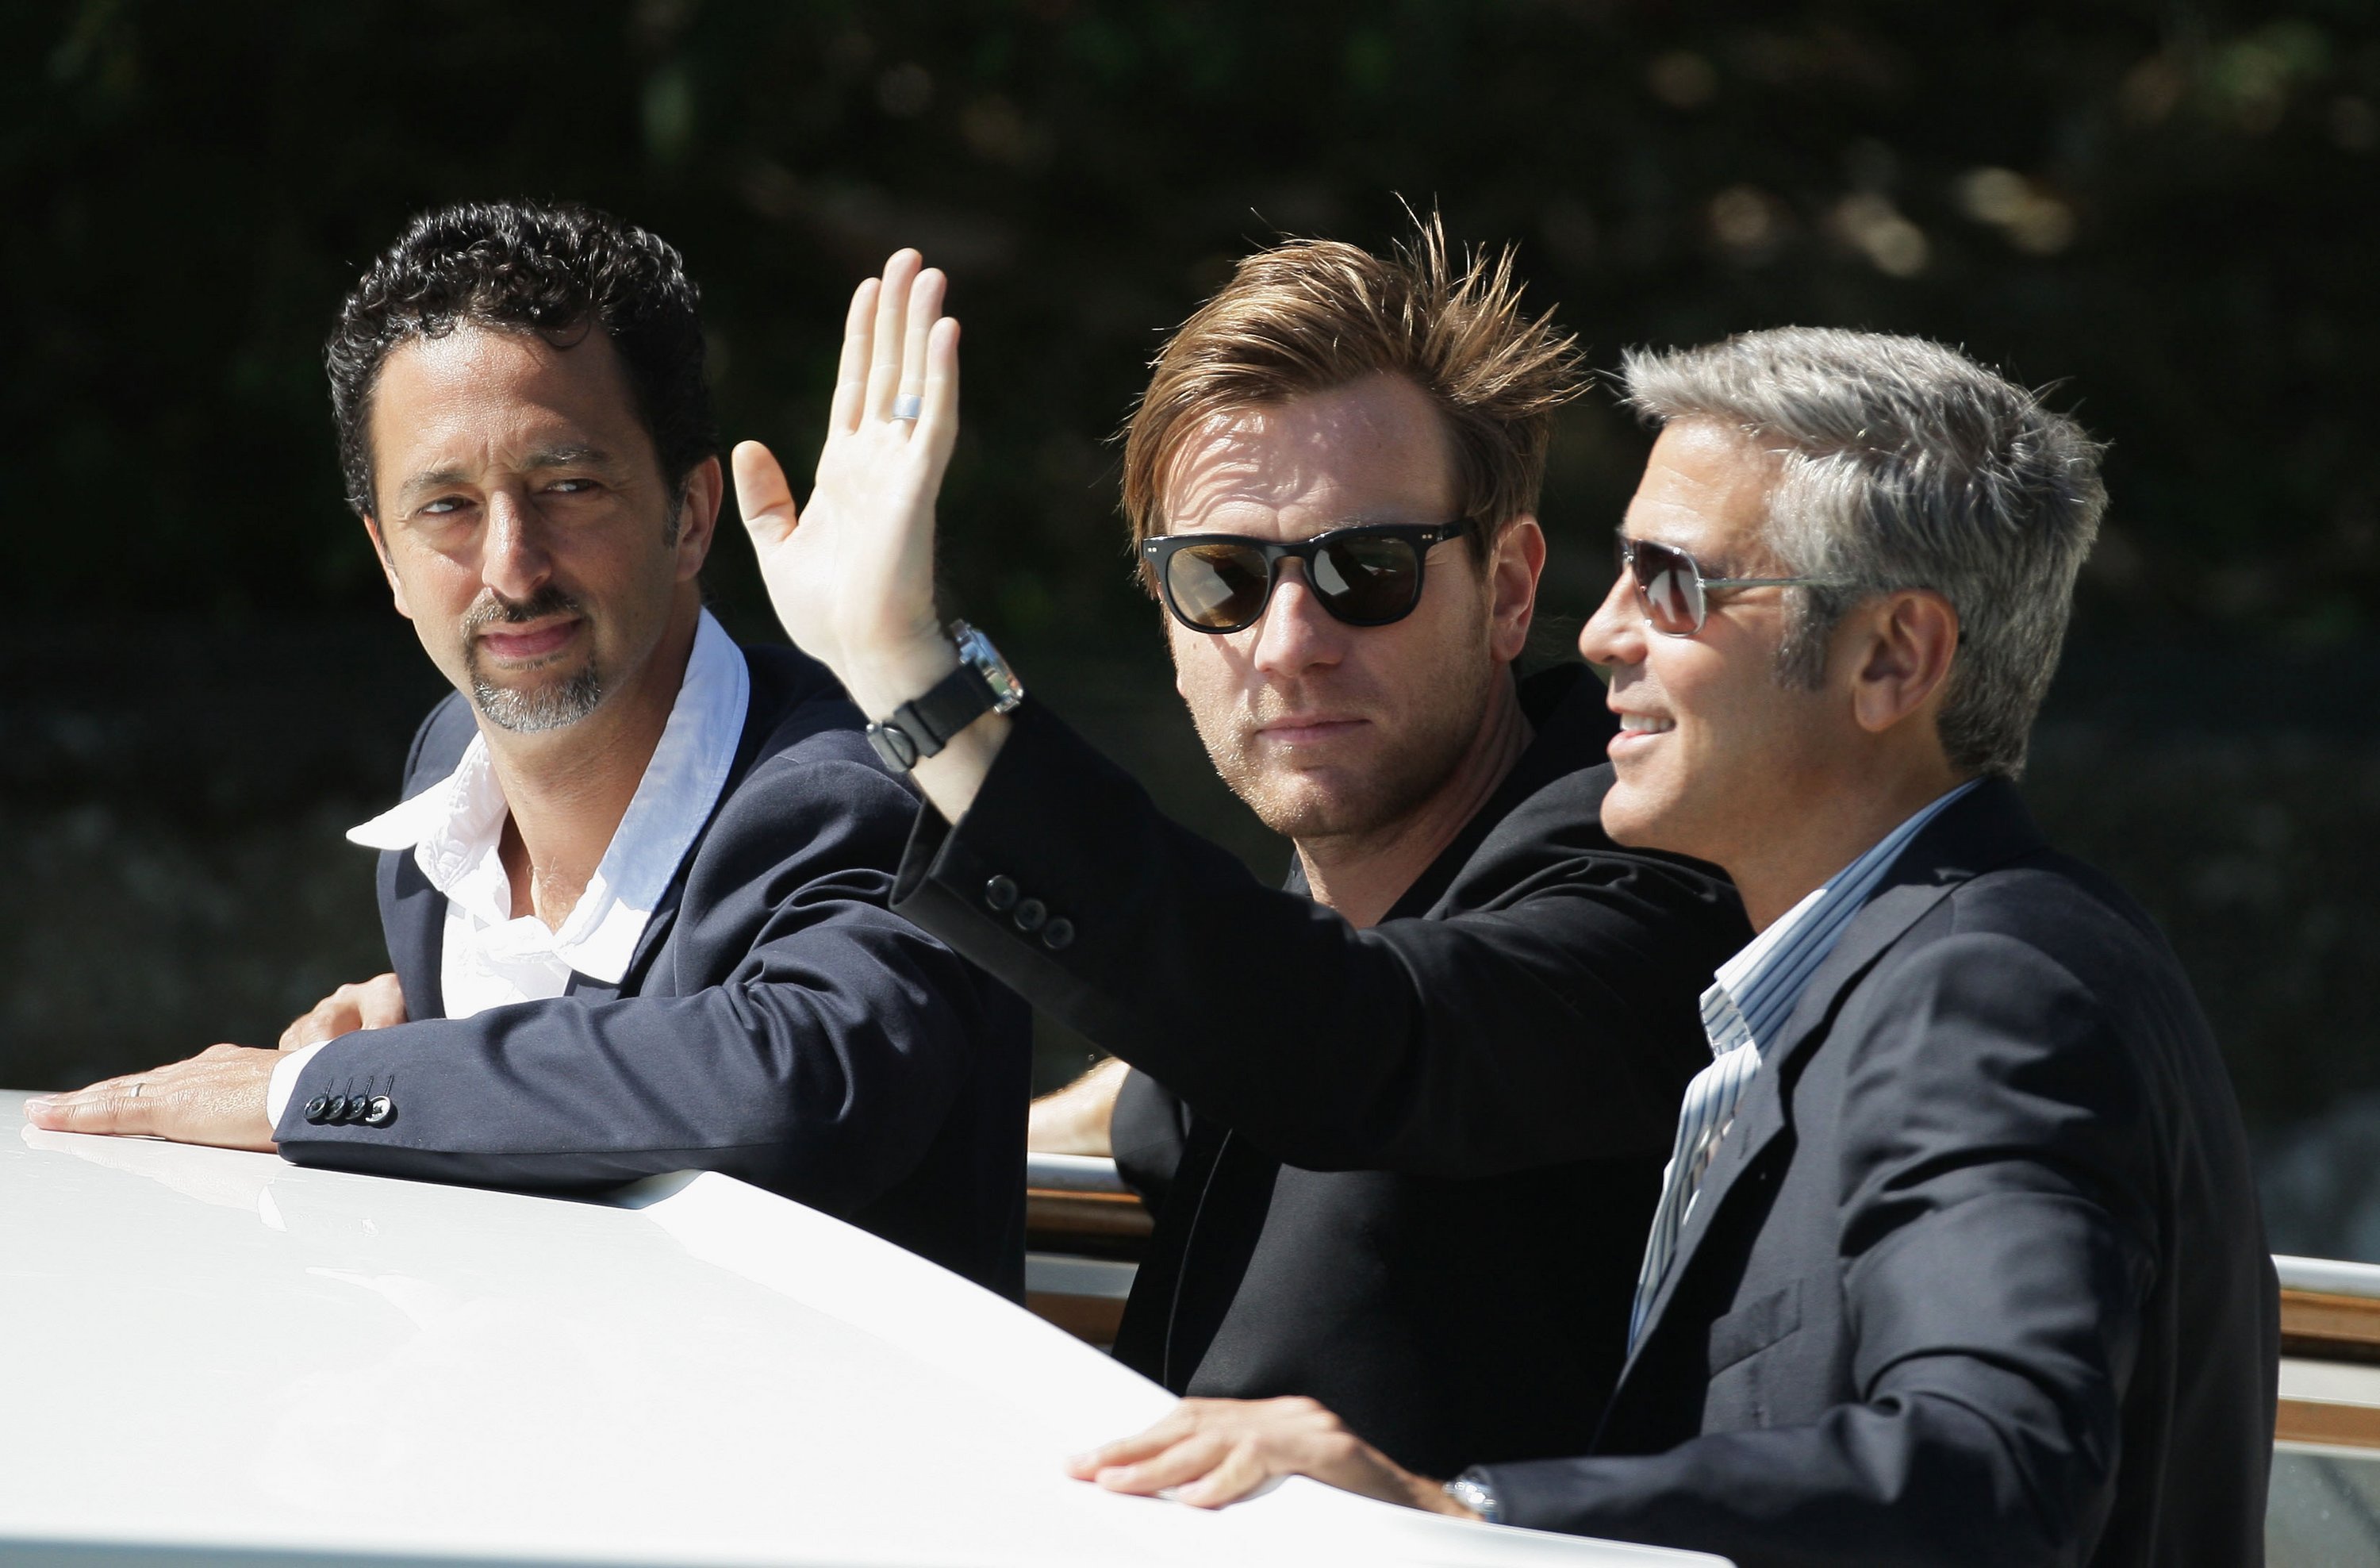 2009-09-08-66th-Venice-Film-Festival-The-Men-Who-Stare-At-Goats-Photocall-016.jpg